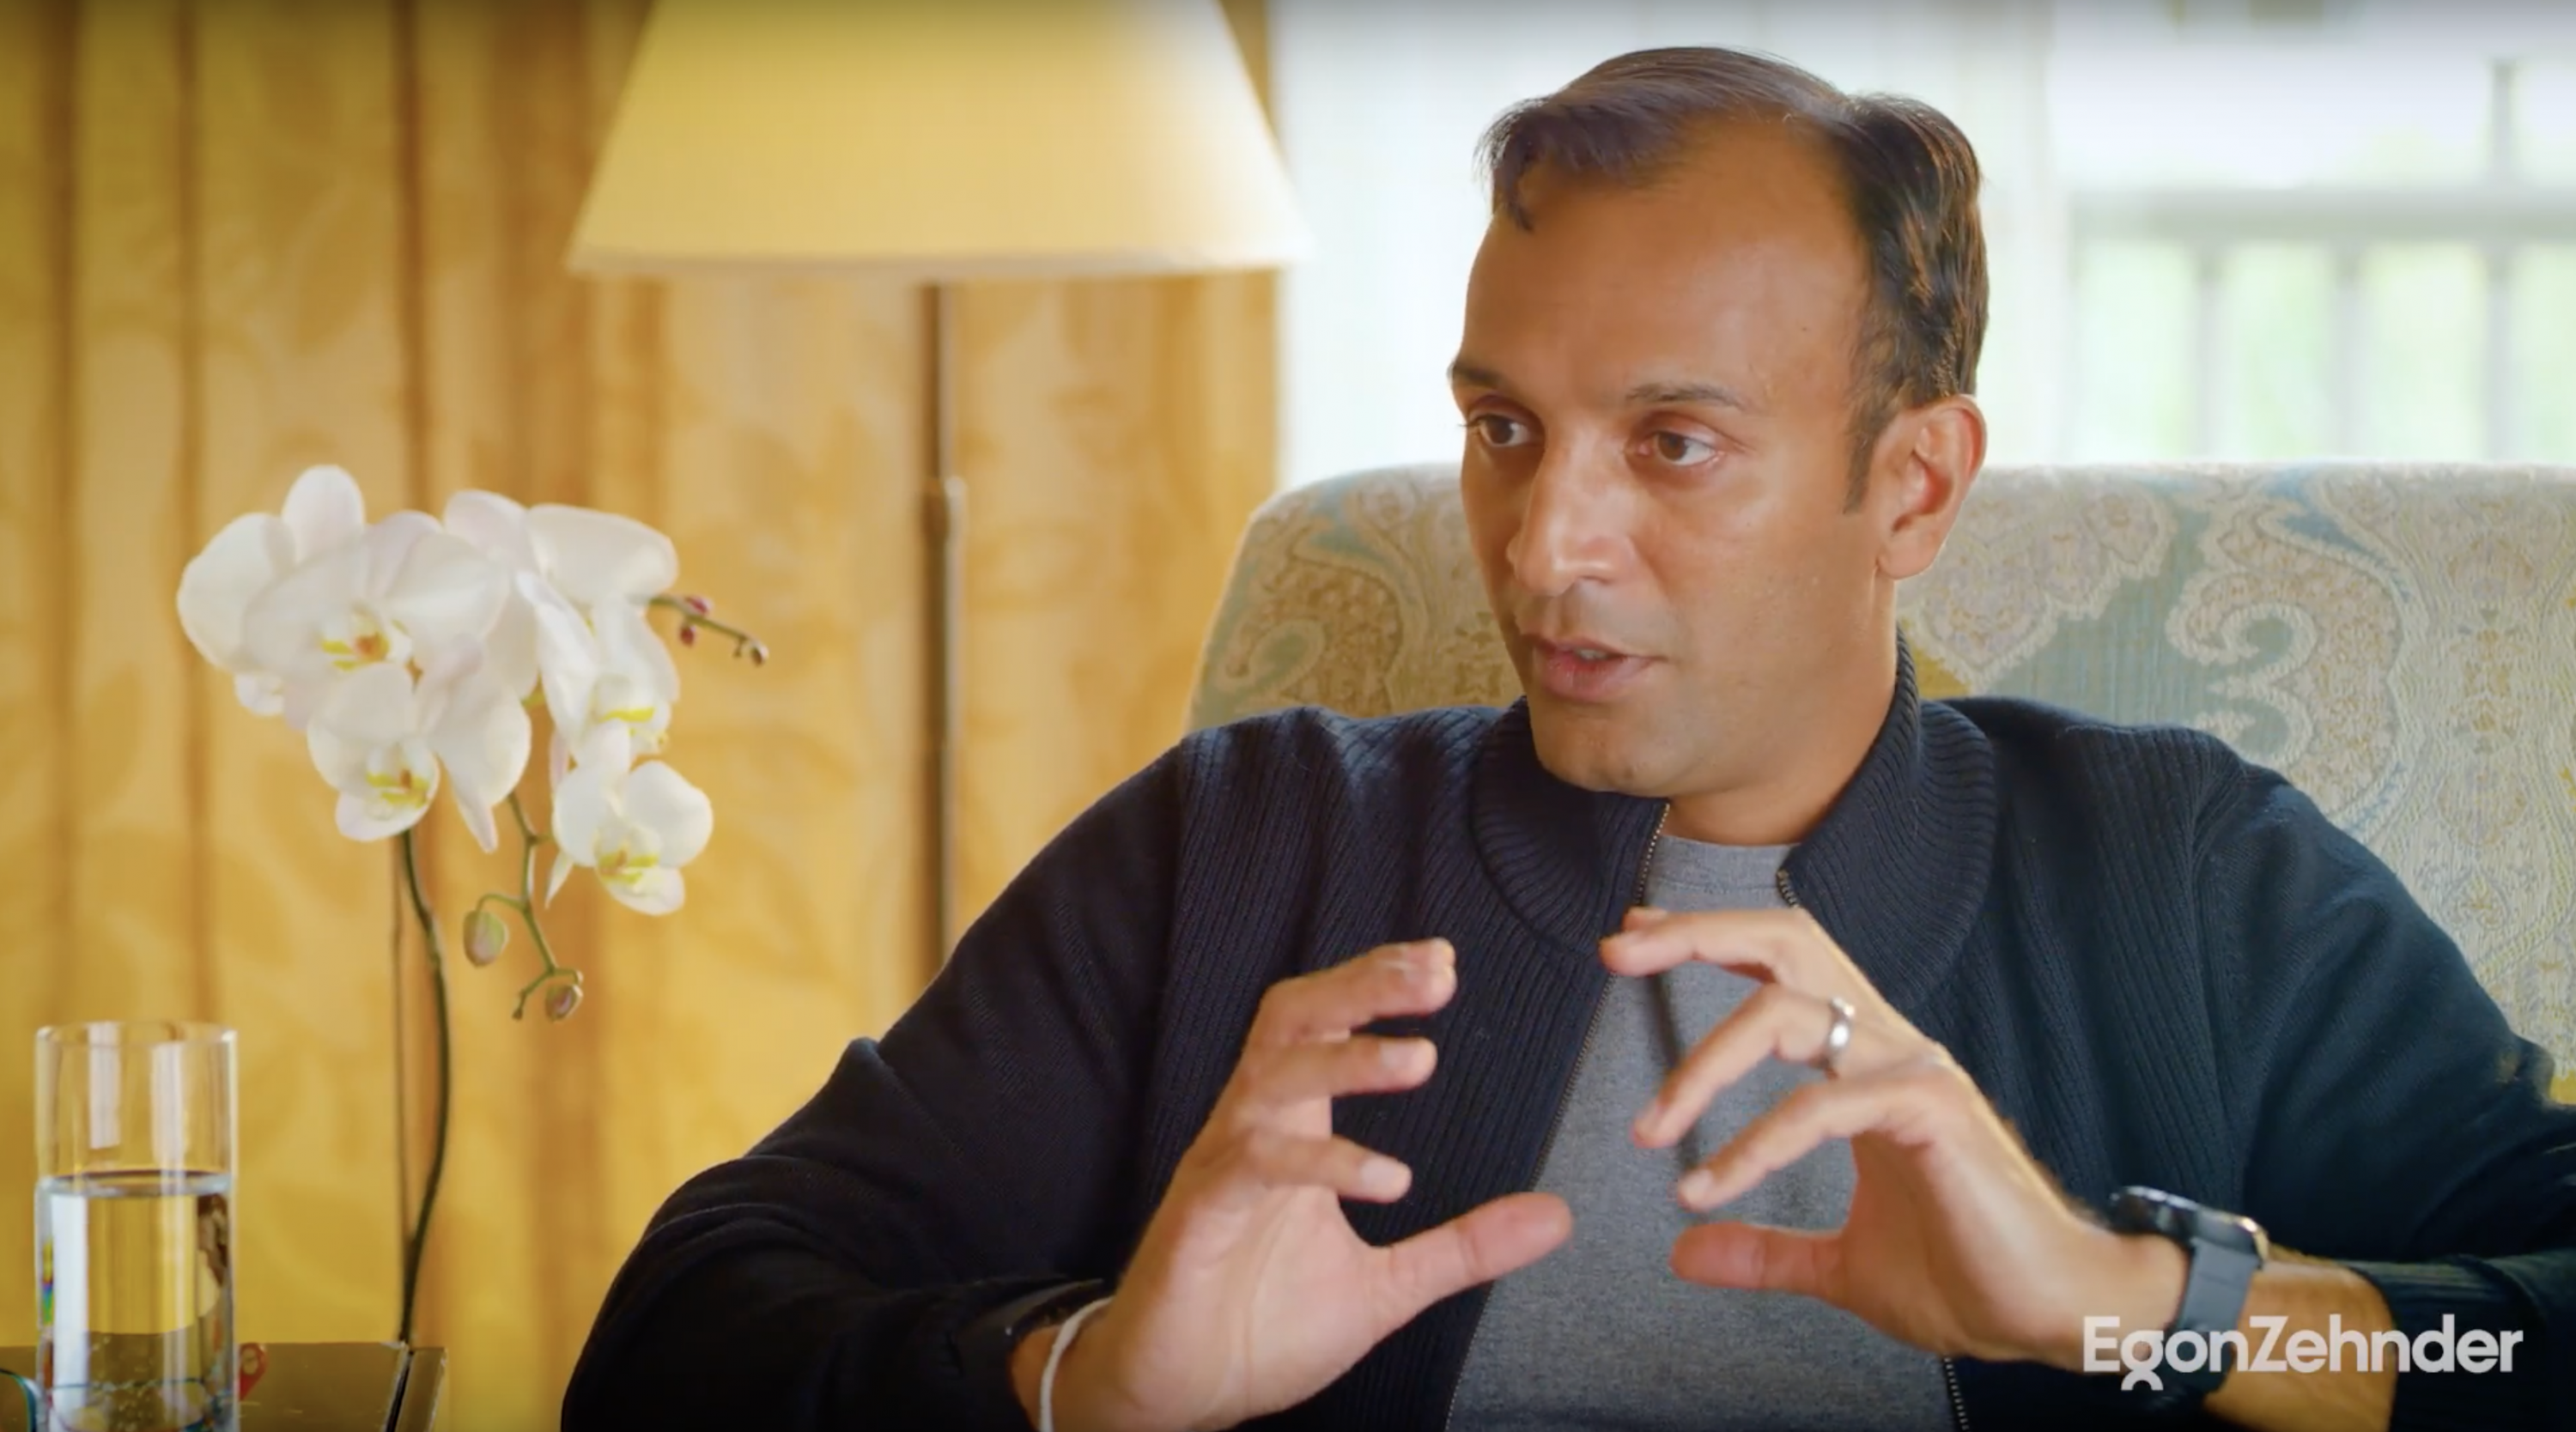 Egon Zehnder's Ricardo Sunderland spoke with mathematician and computer scientist DJ Patil, former Chief Data Scientist of the United States Office of Science and Technology Policy, on his EBP experience.